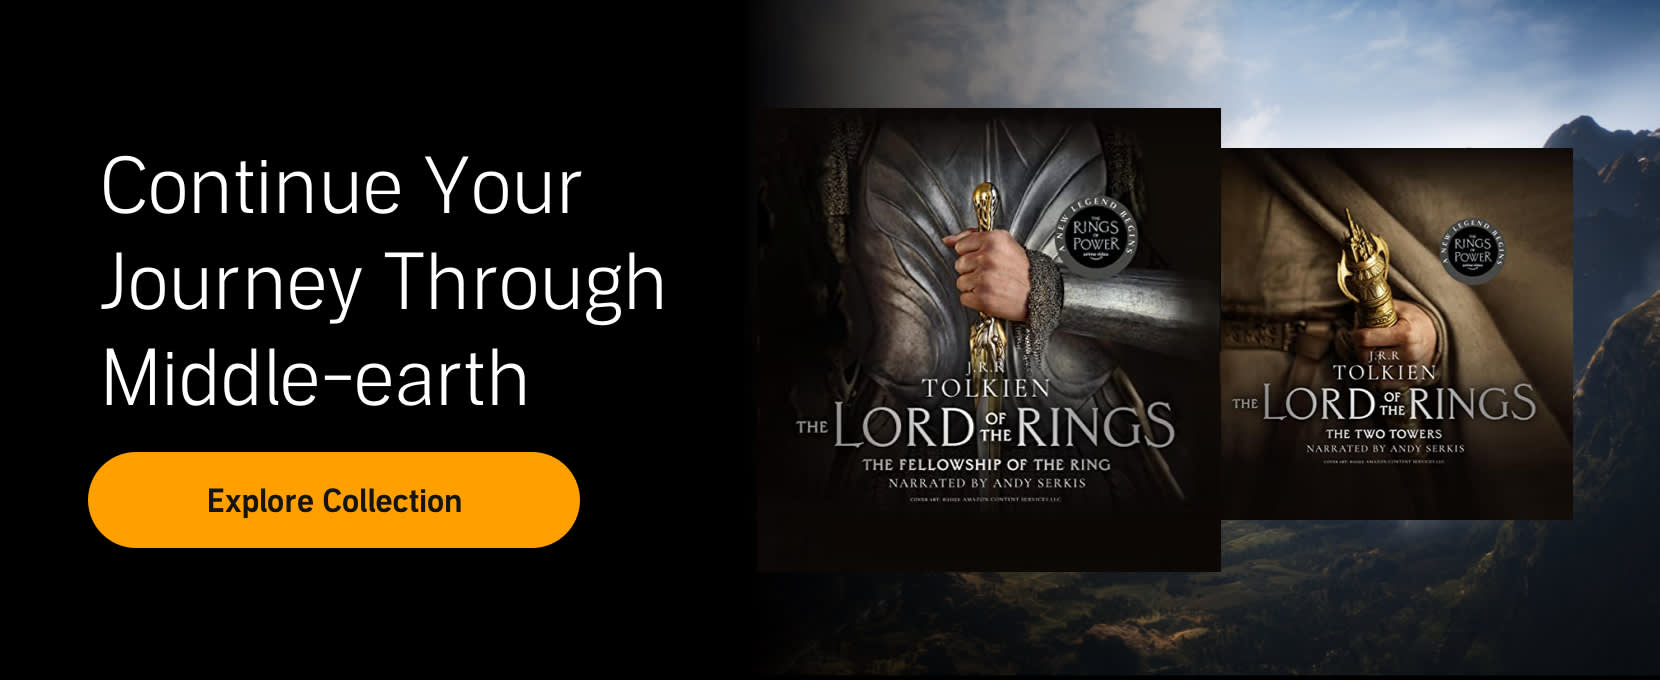 Explore the collection and continue your journey through Middle-earth